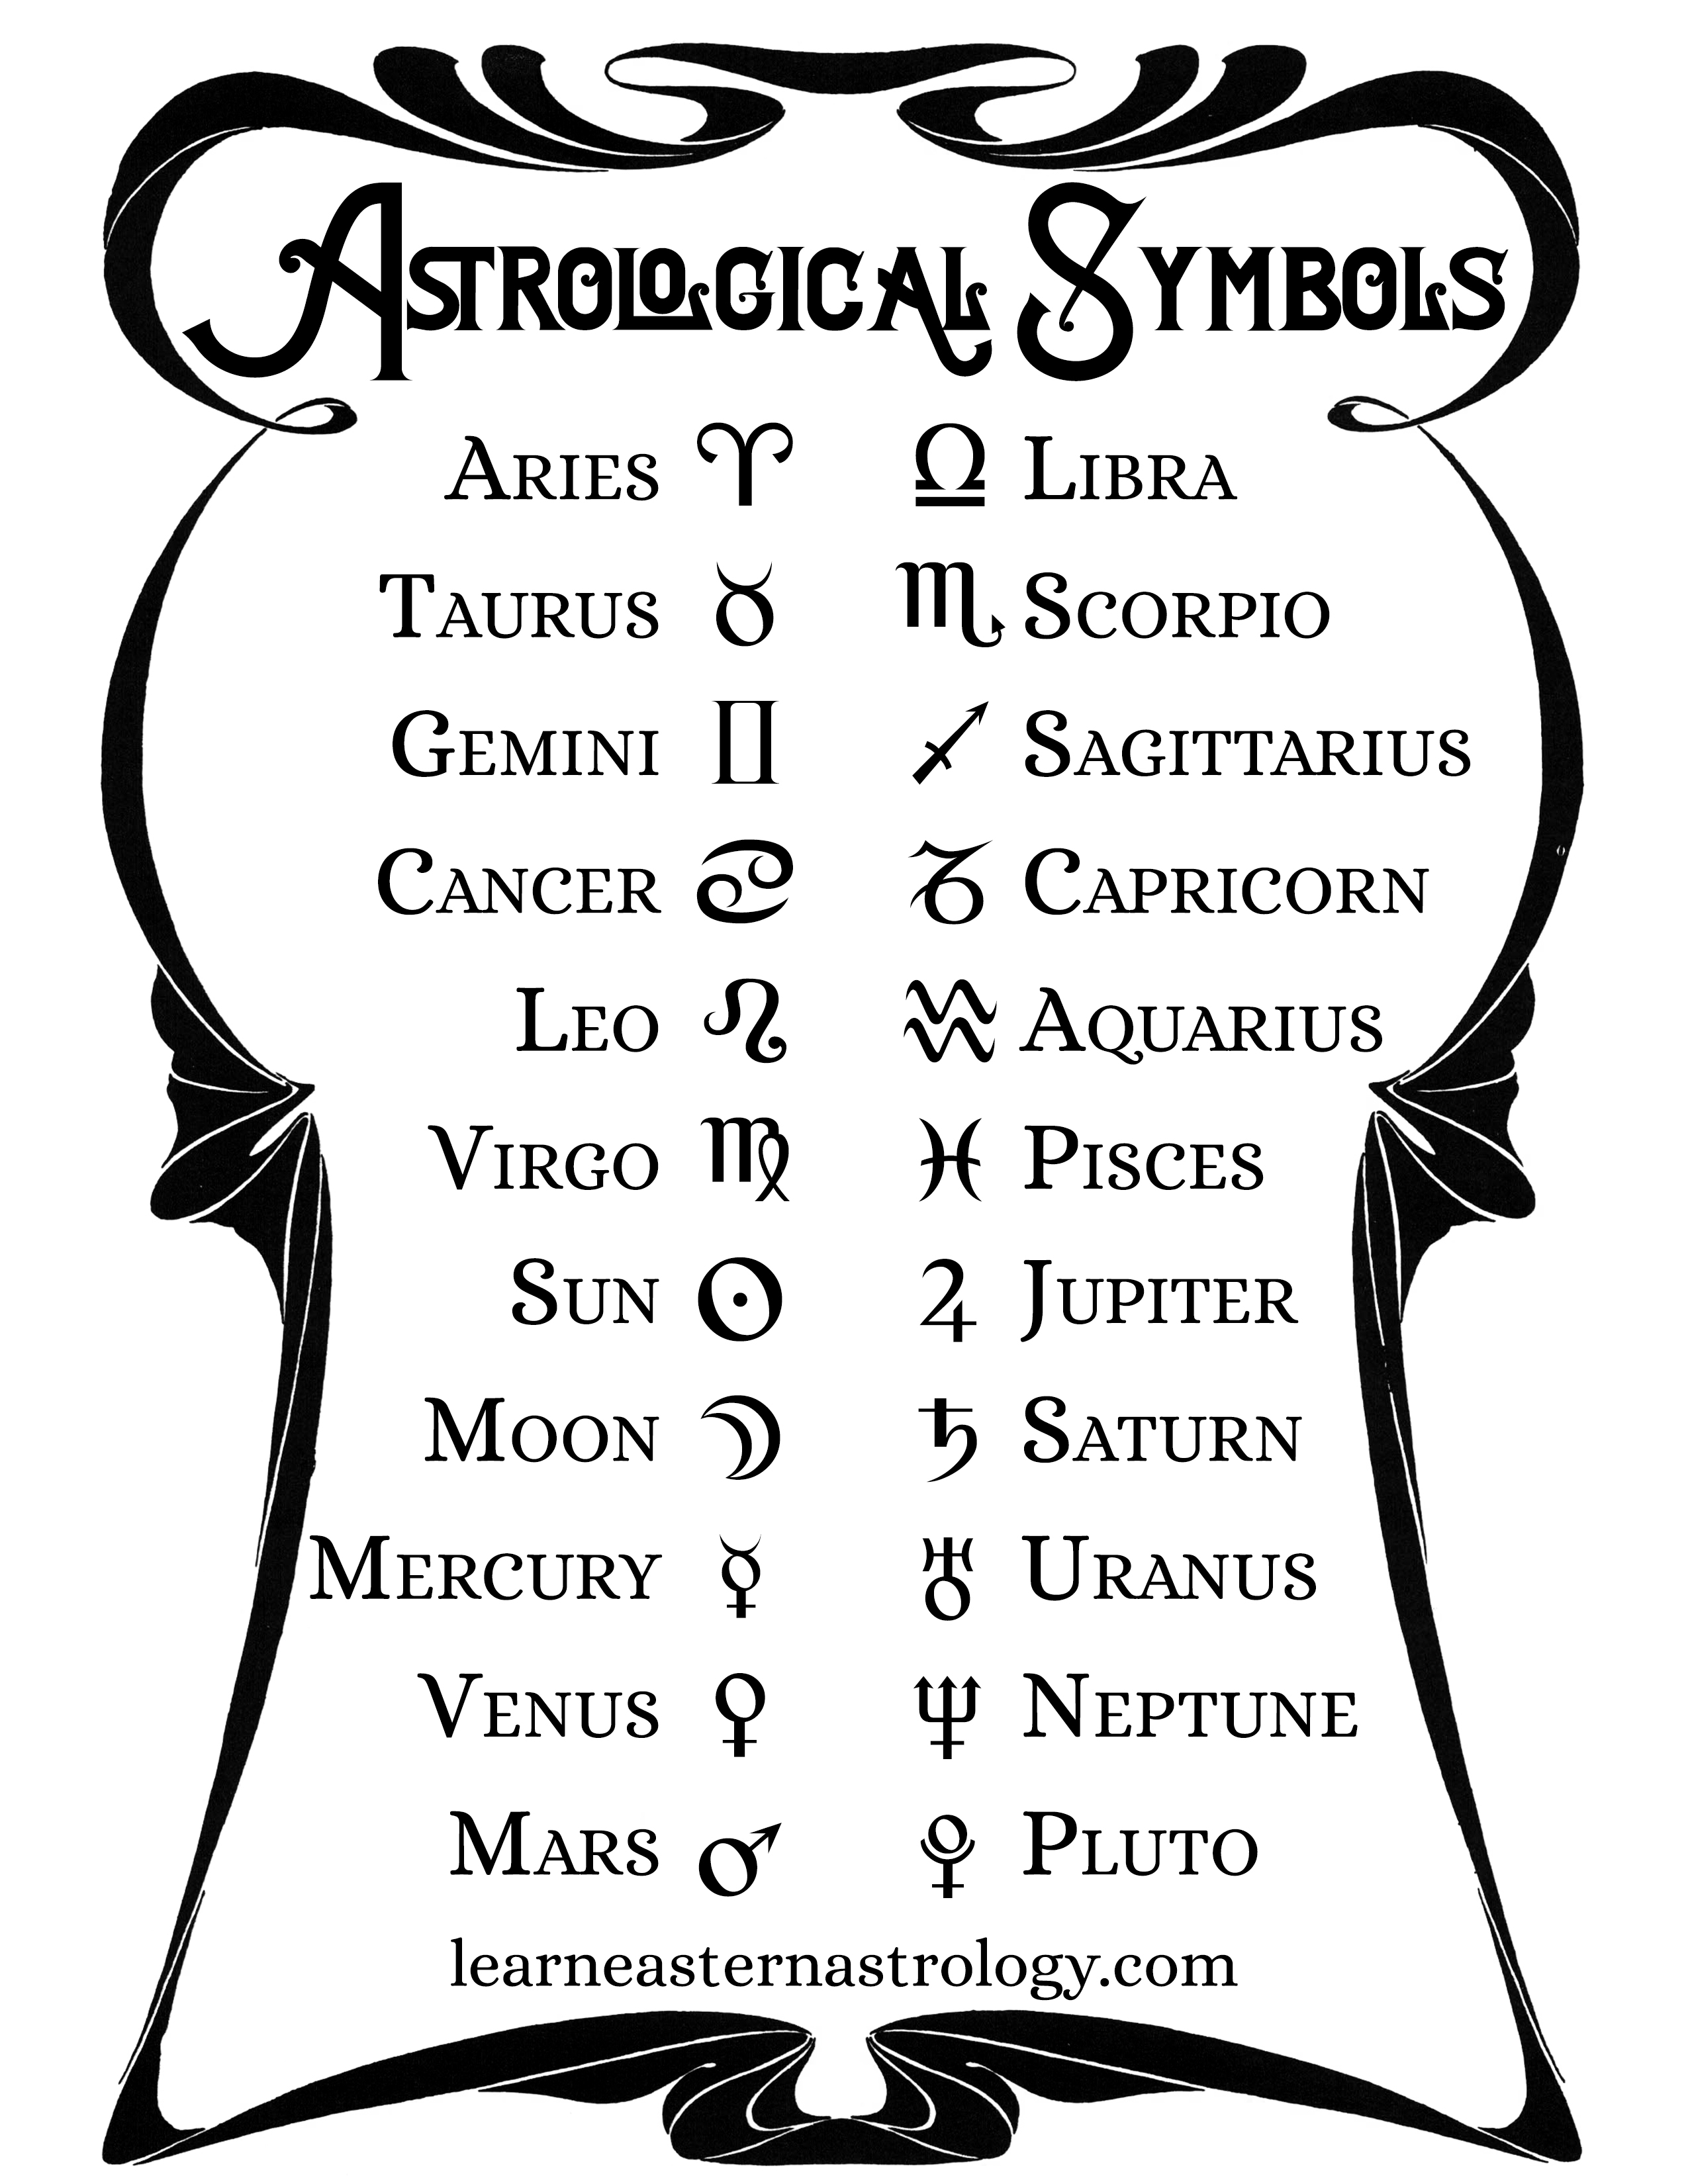 the meaning of astrological symbols